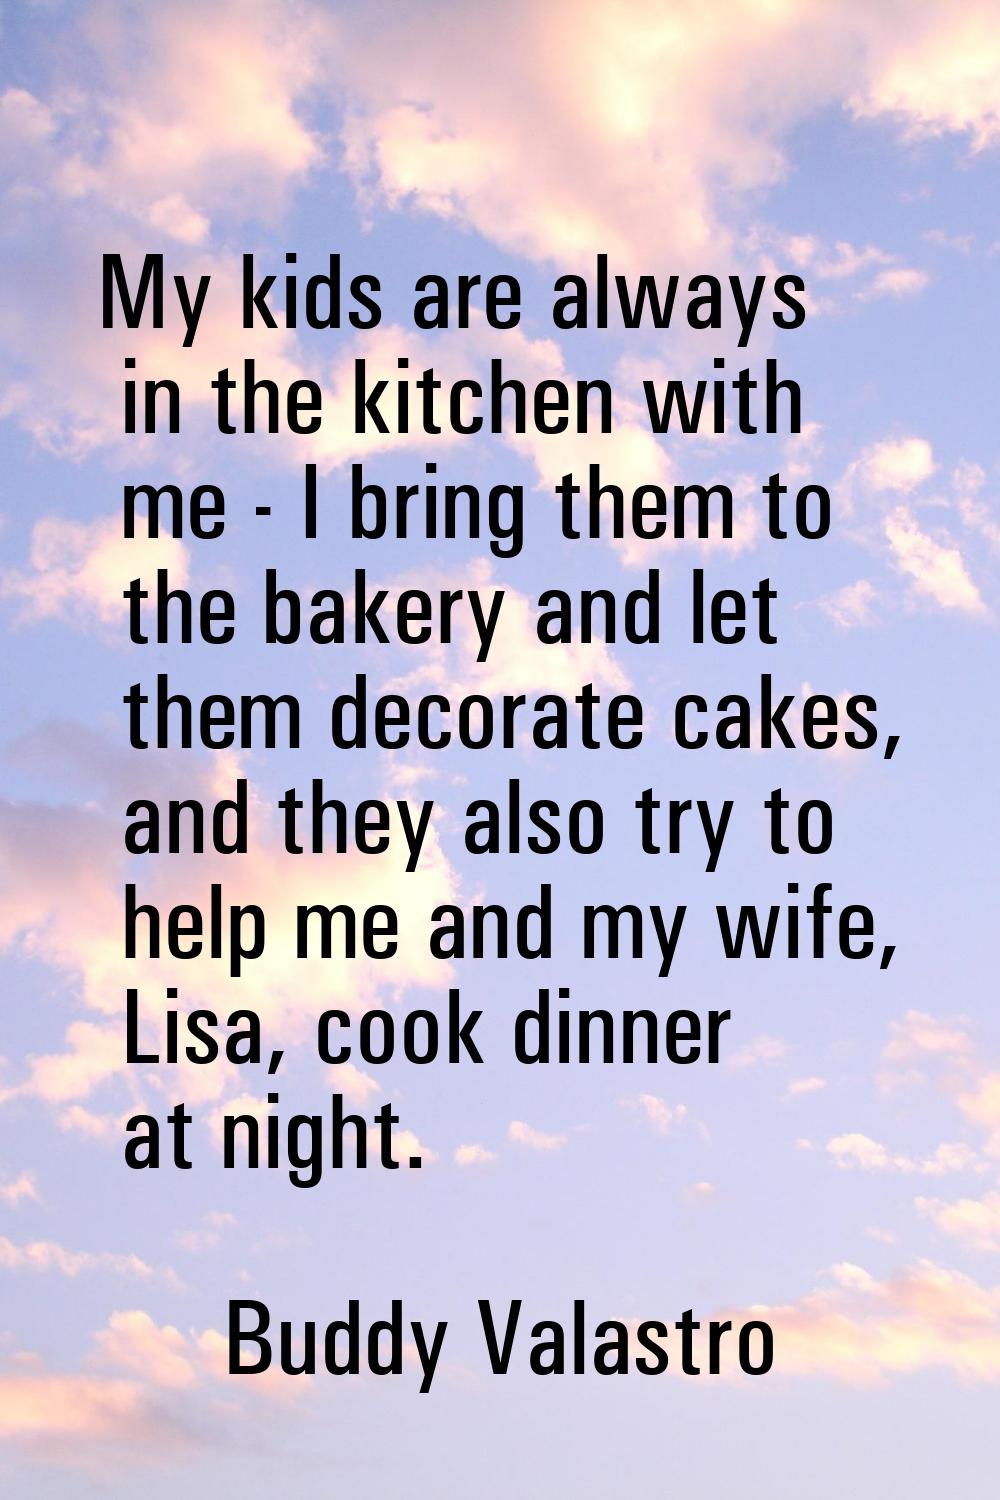 My kids are always in the kitchen with me - I bring them to the bakery and let them decorate cakes,